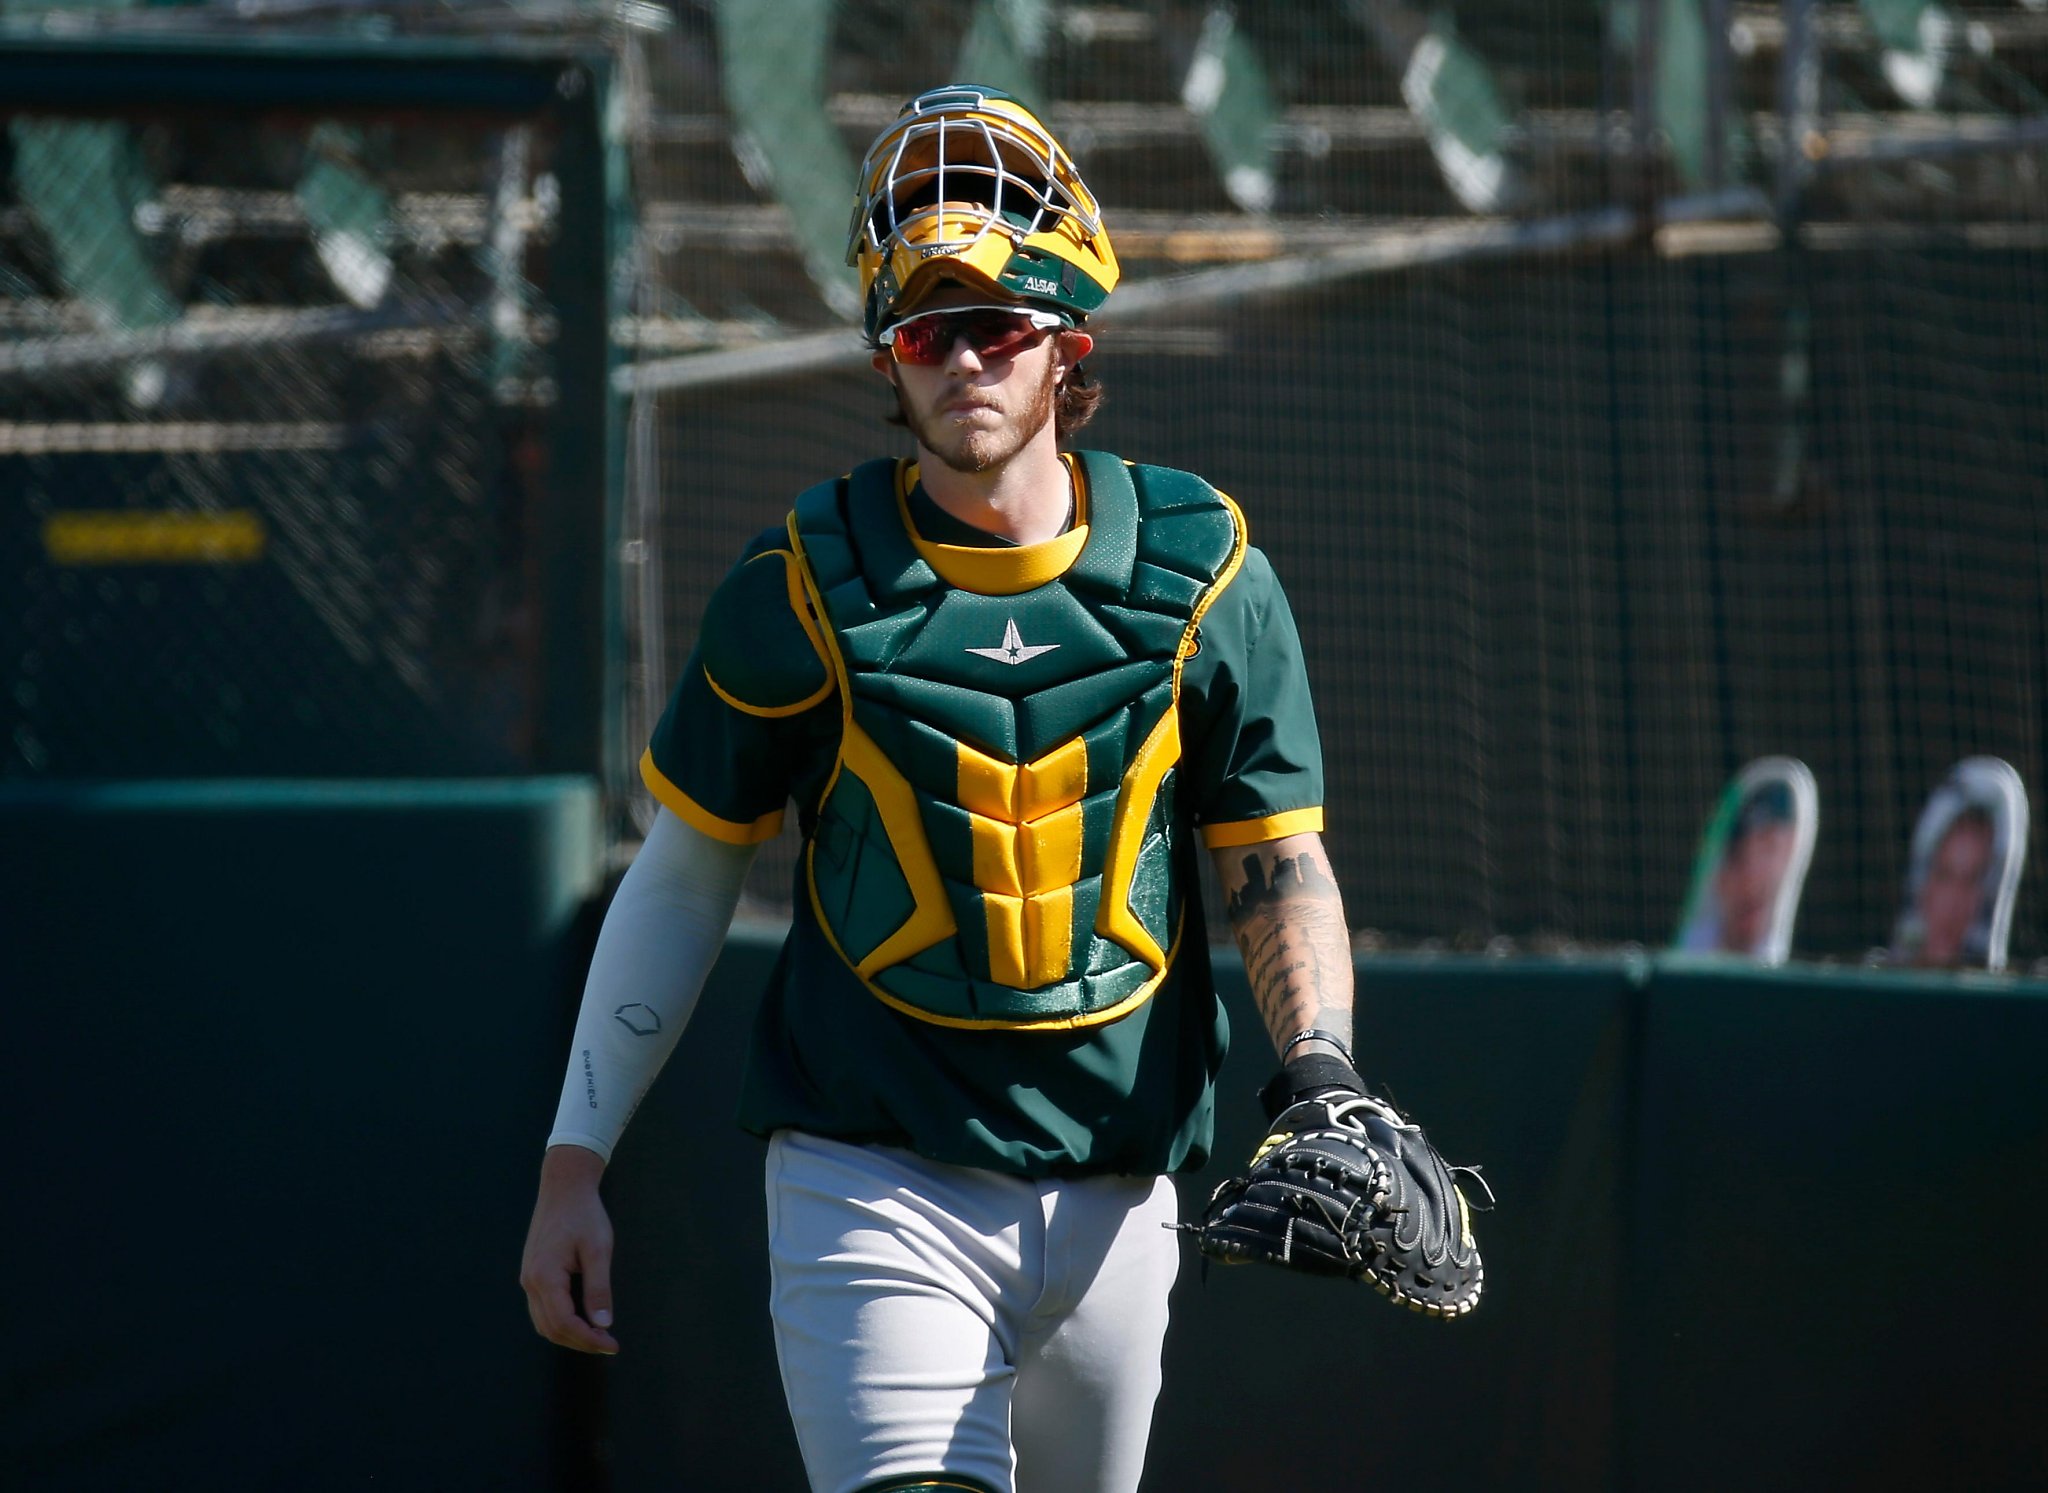 A's catcher Jonah Heim goes 1for3 in MLB debut at Texas